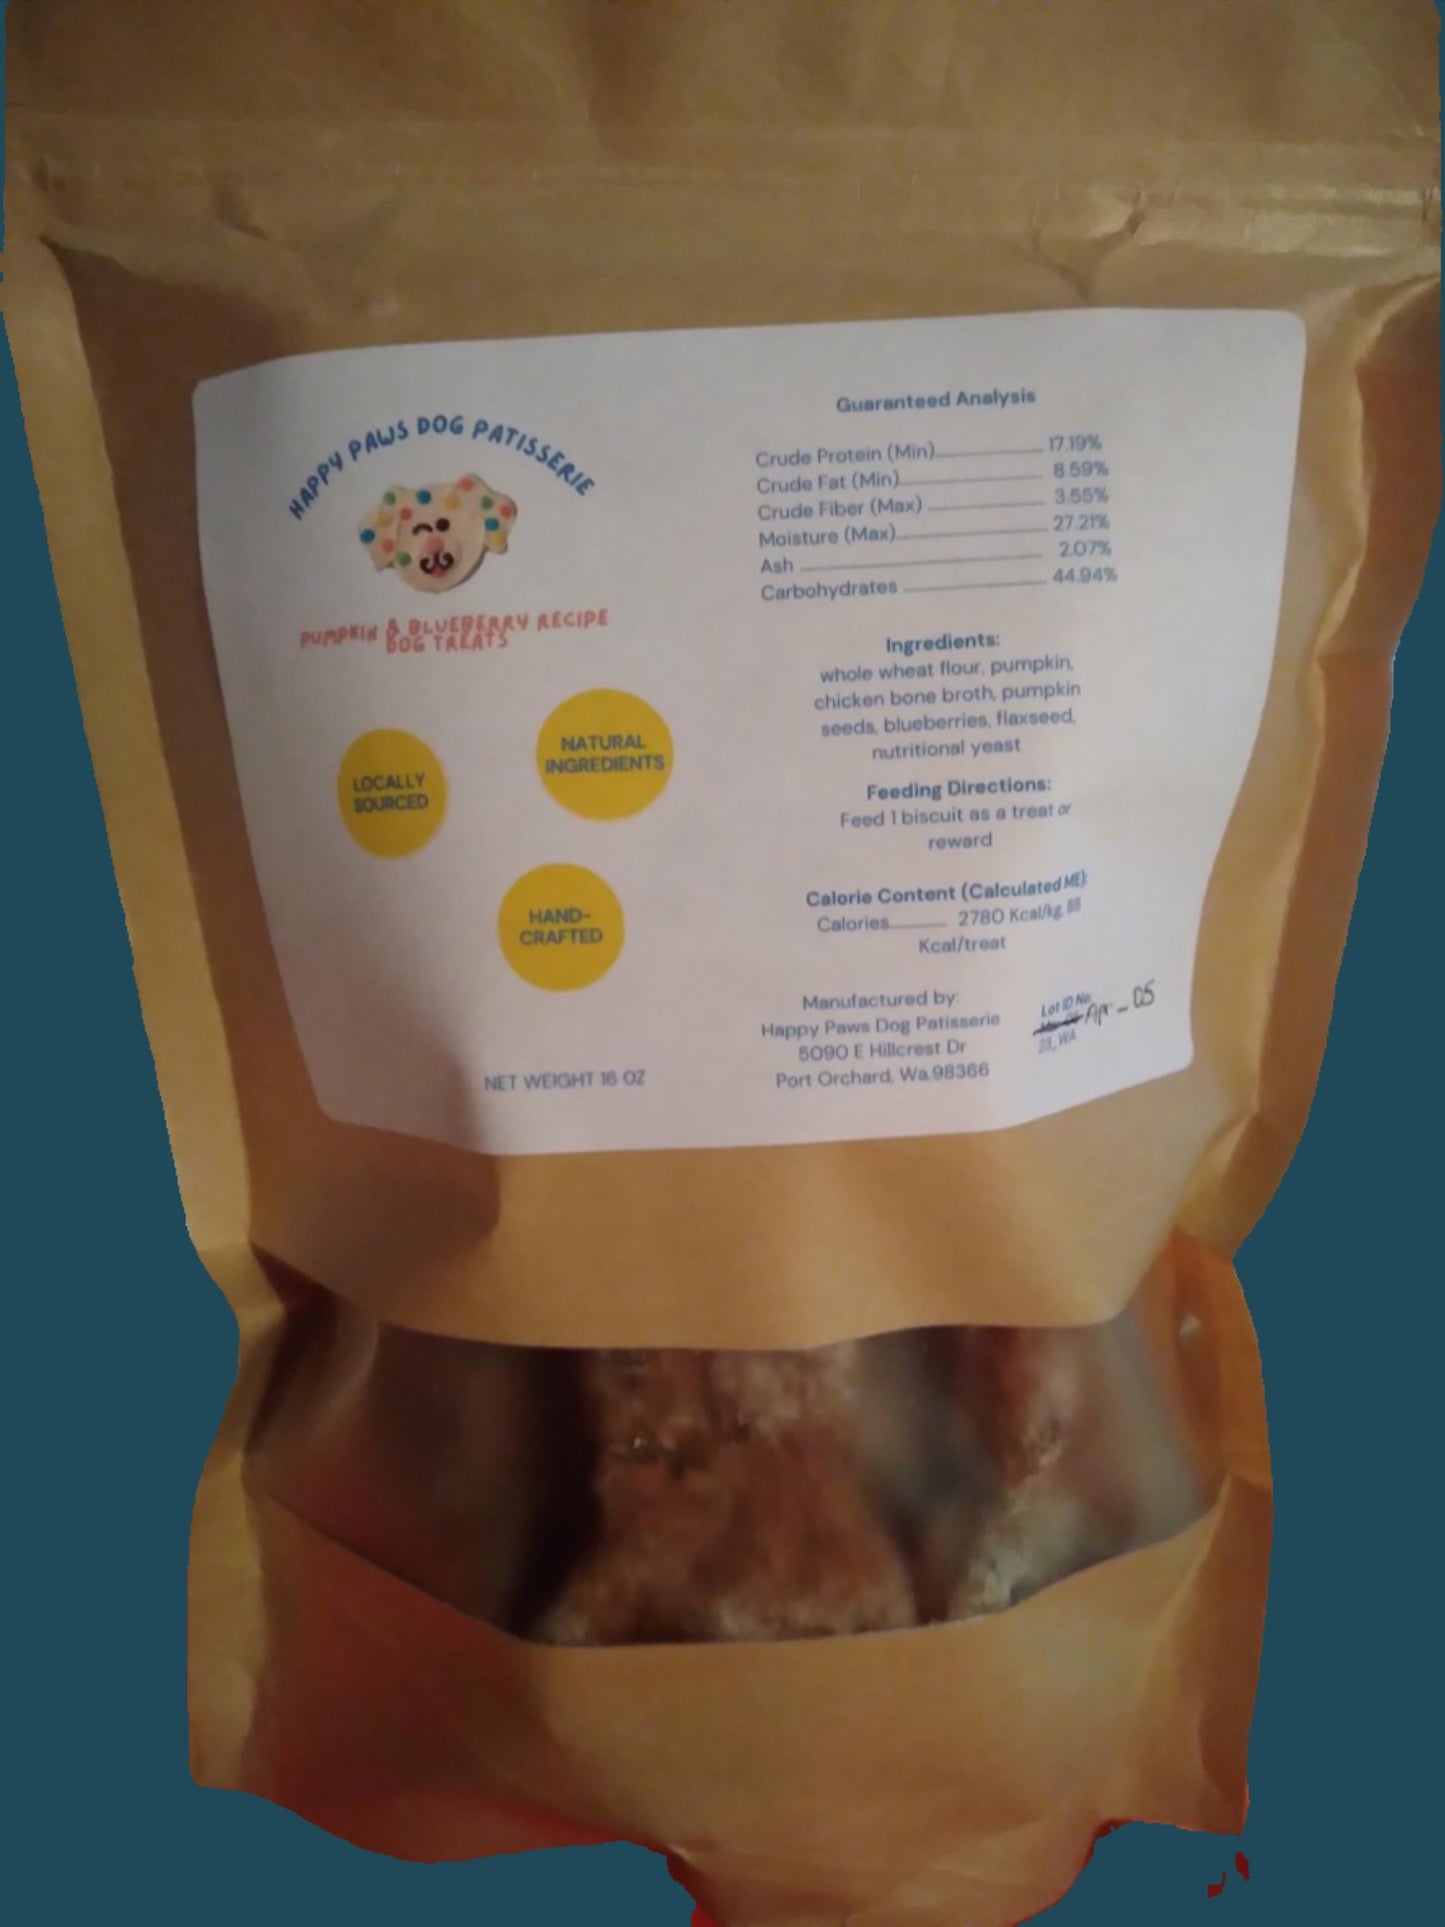 Gourmet hand-crafted dog biscuit treats